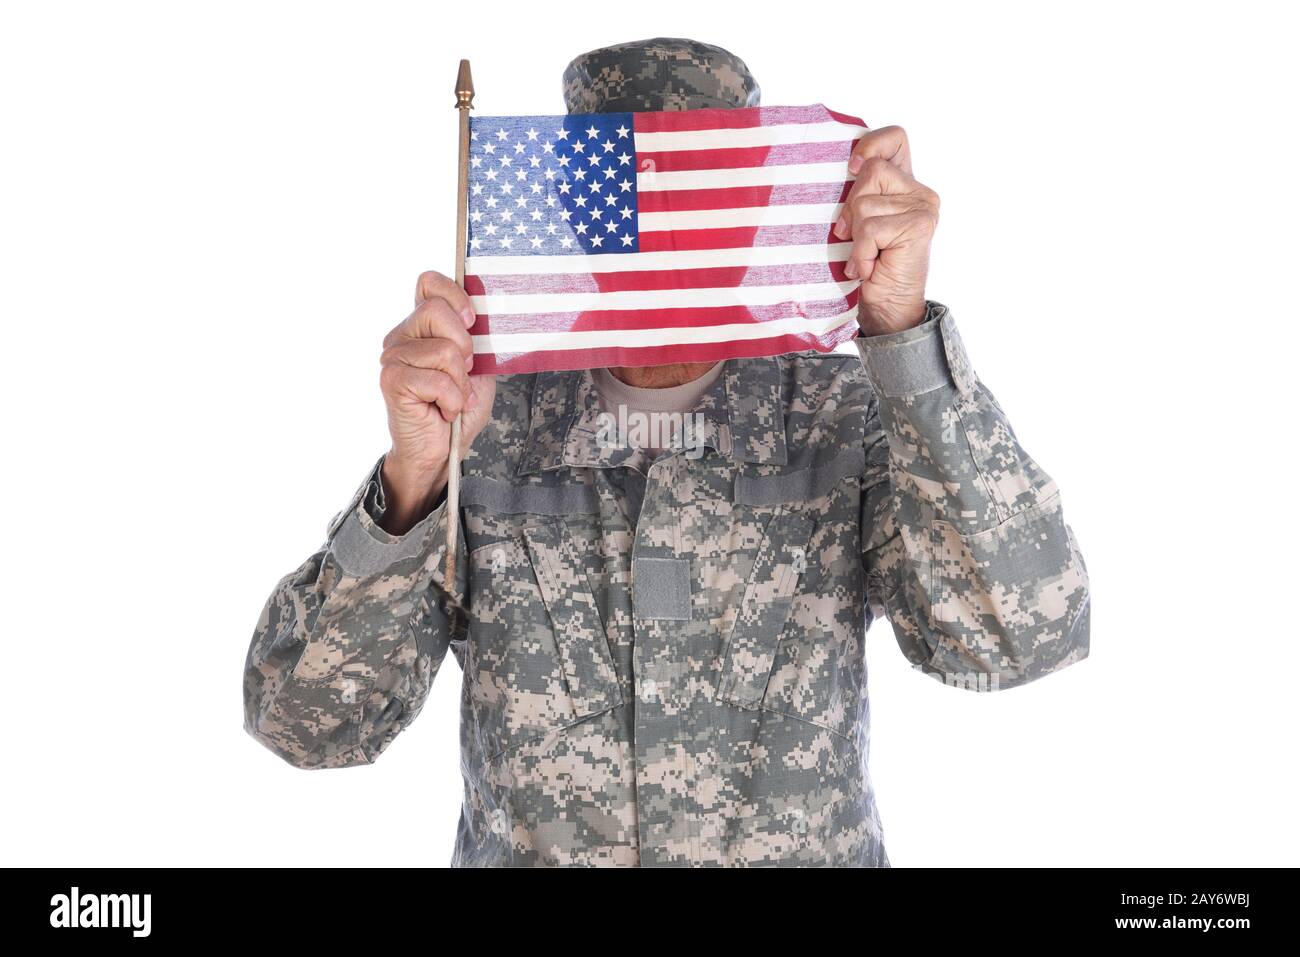 Patriotism Concept. A soldier in camouflage fatigues holding an American Flag in front of his face. Stock Photo